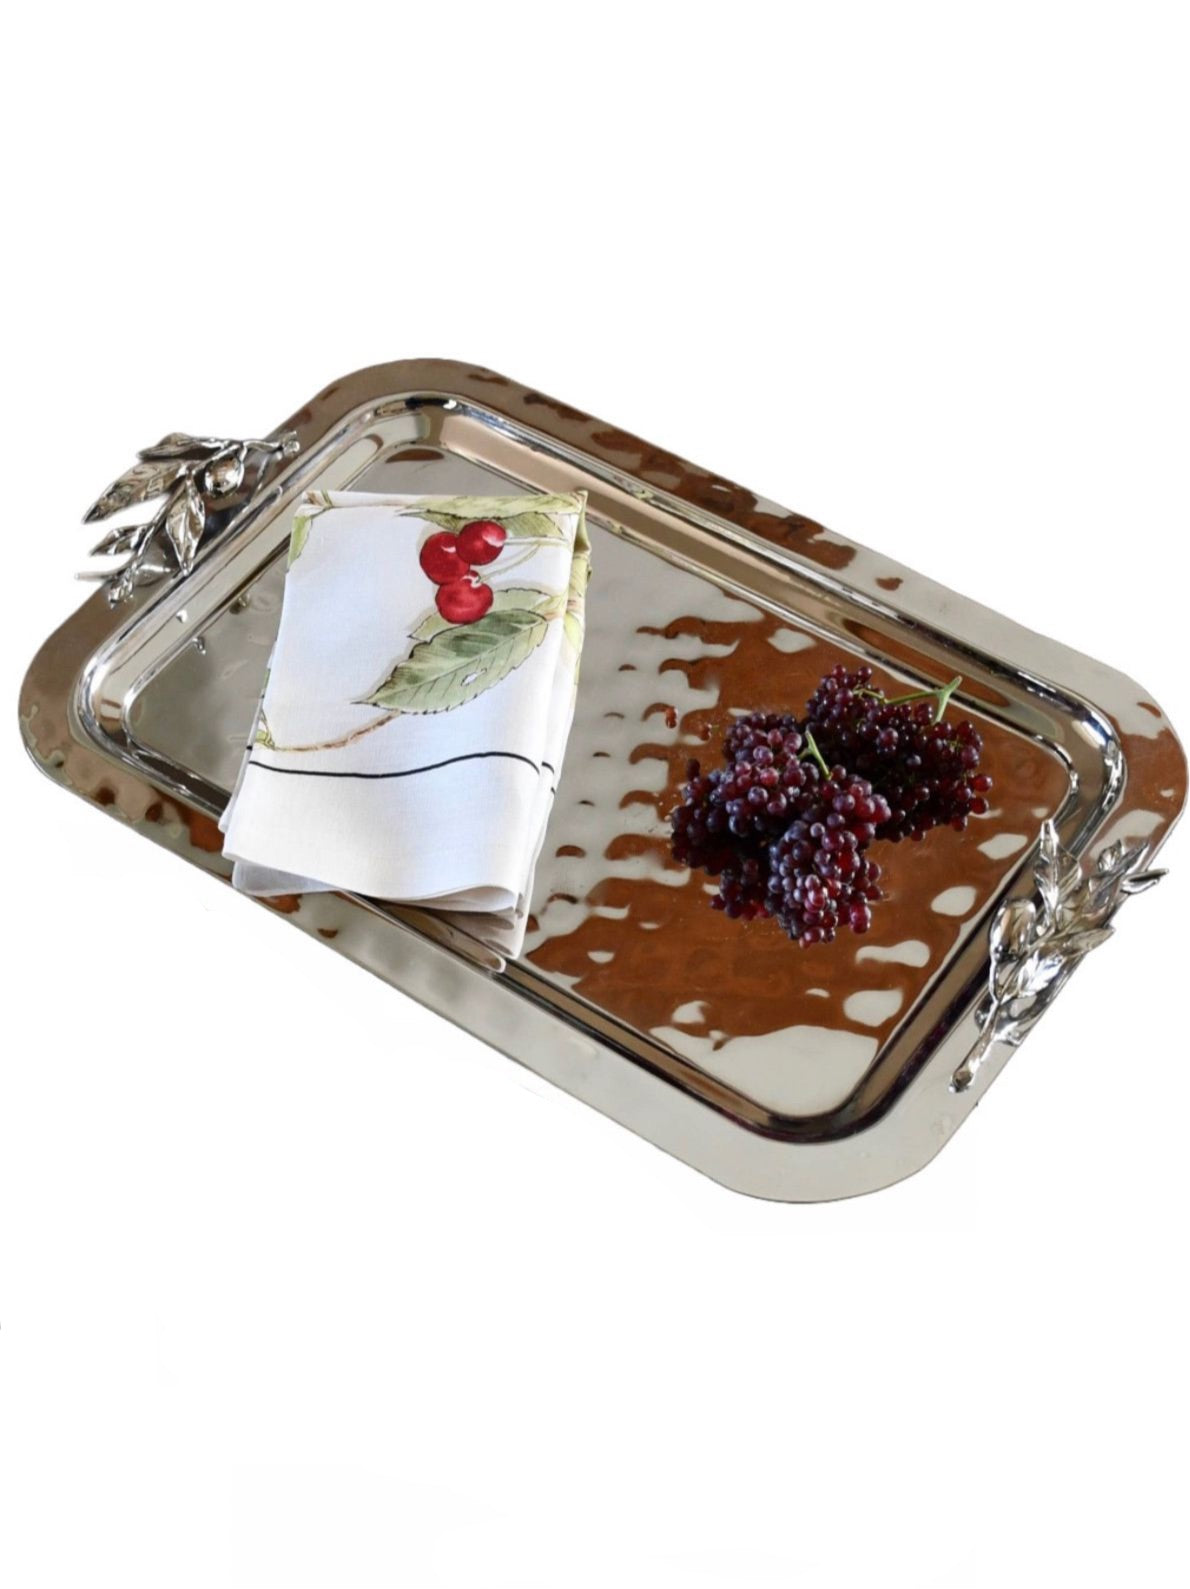 Stainless Steel Large Rectangular Tray with Olive Leaf Design Sold by KYA Home Decor.